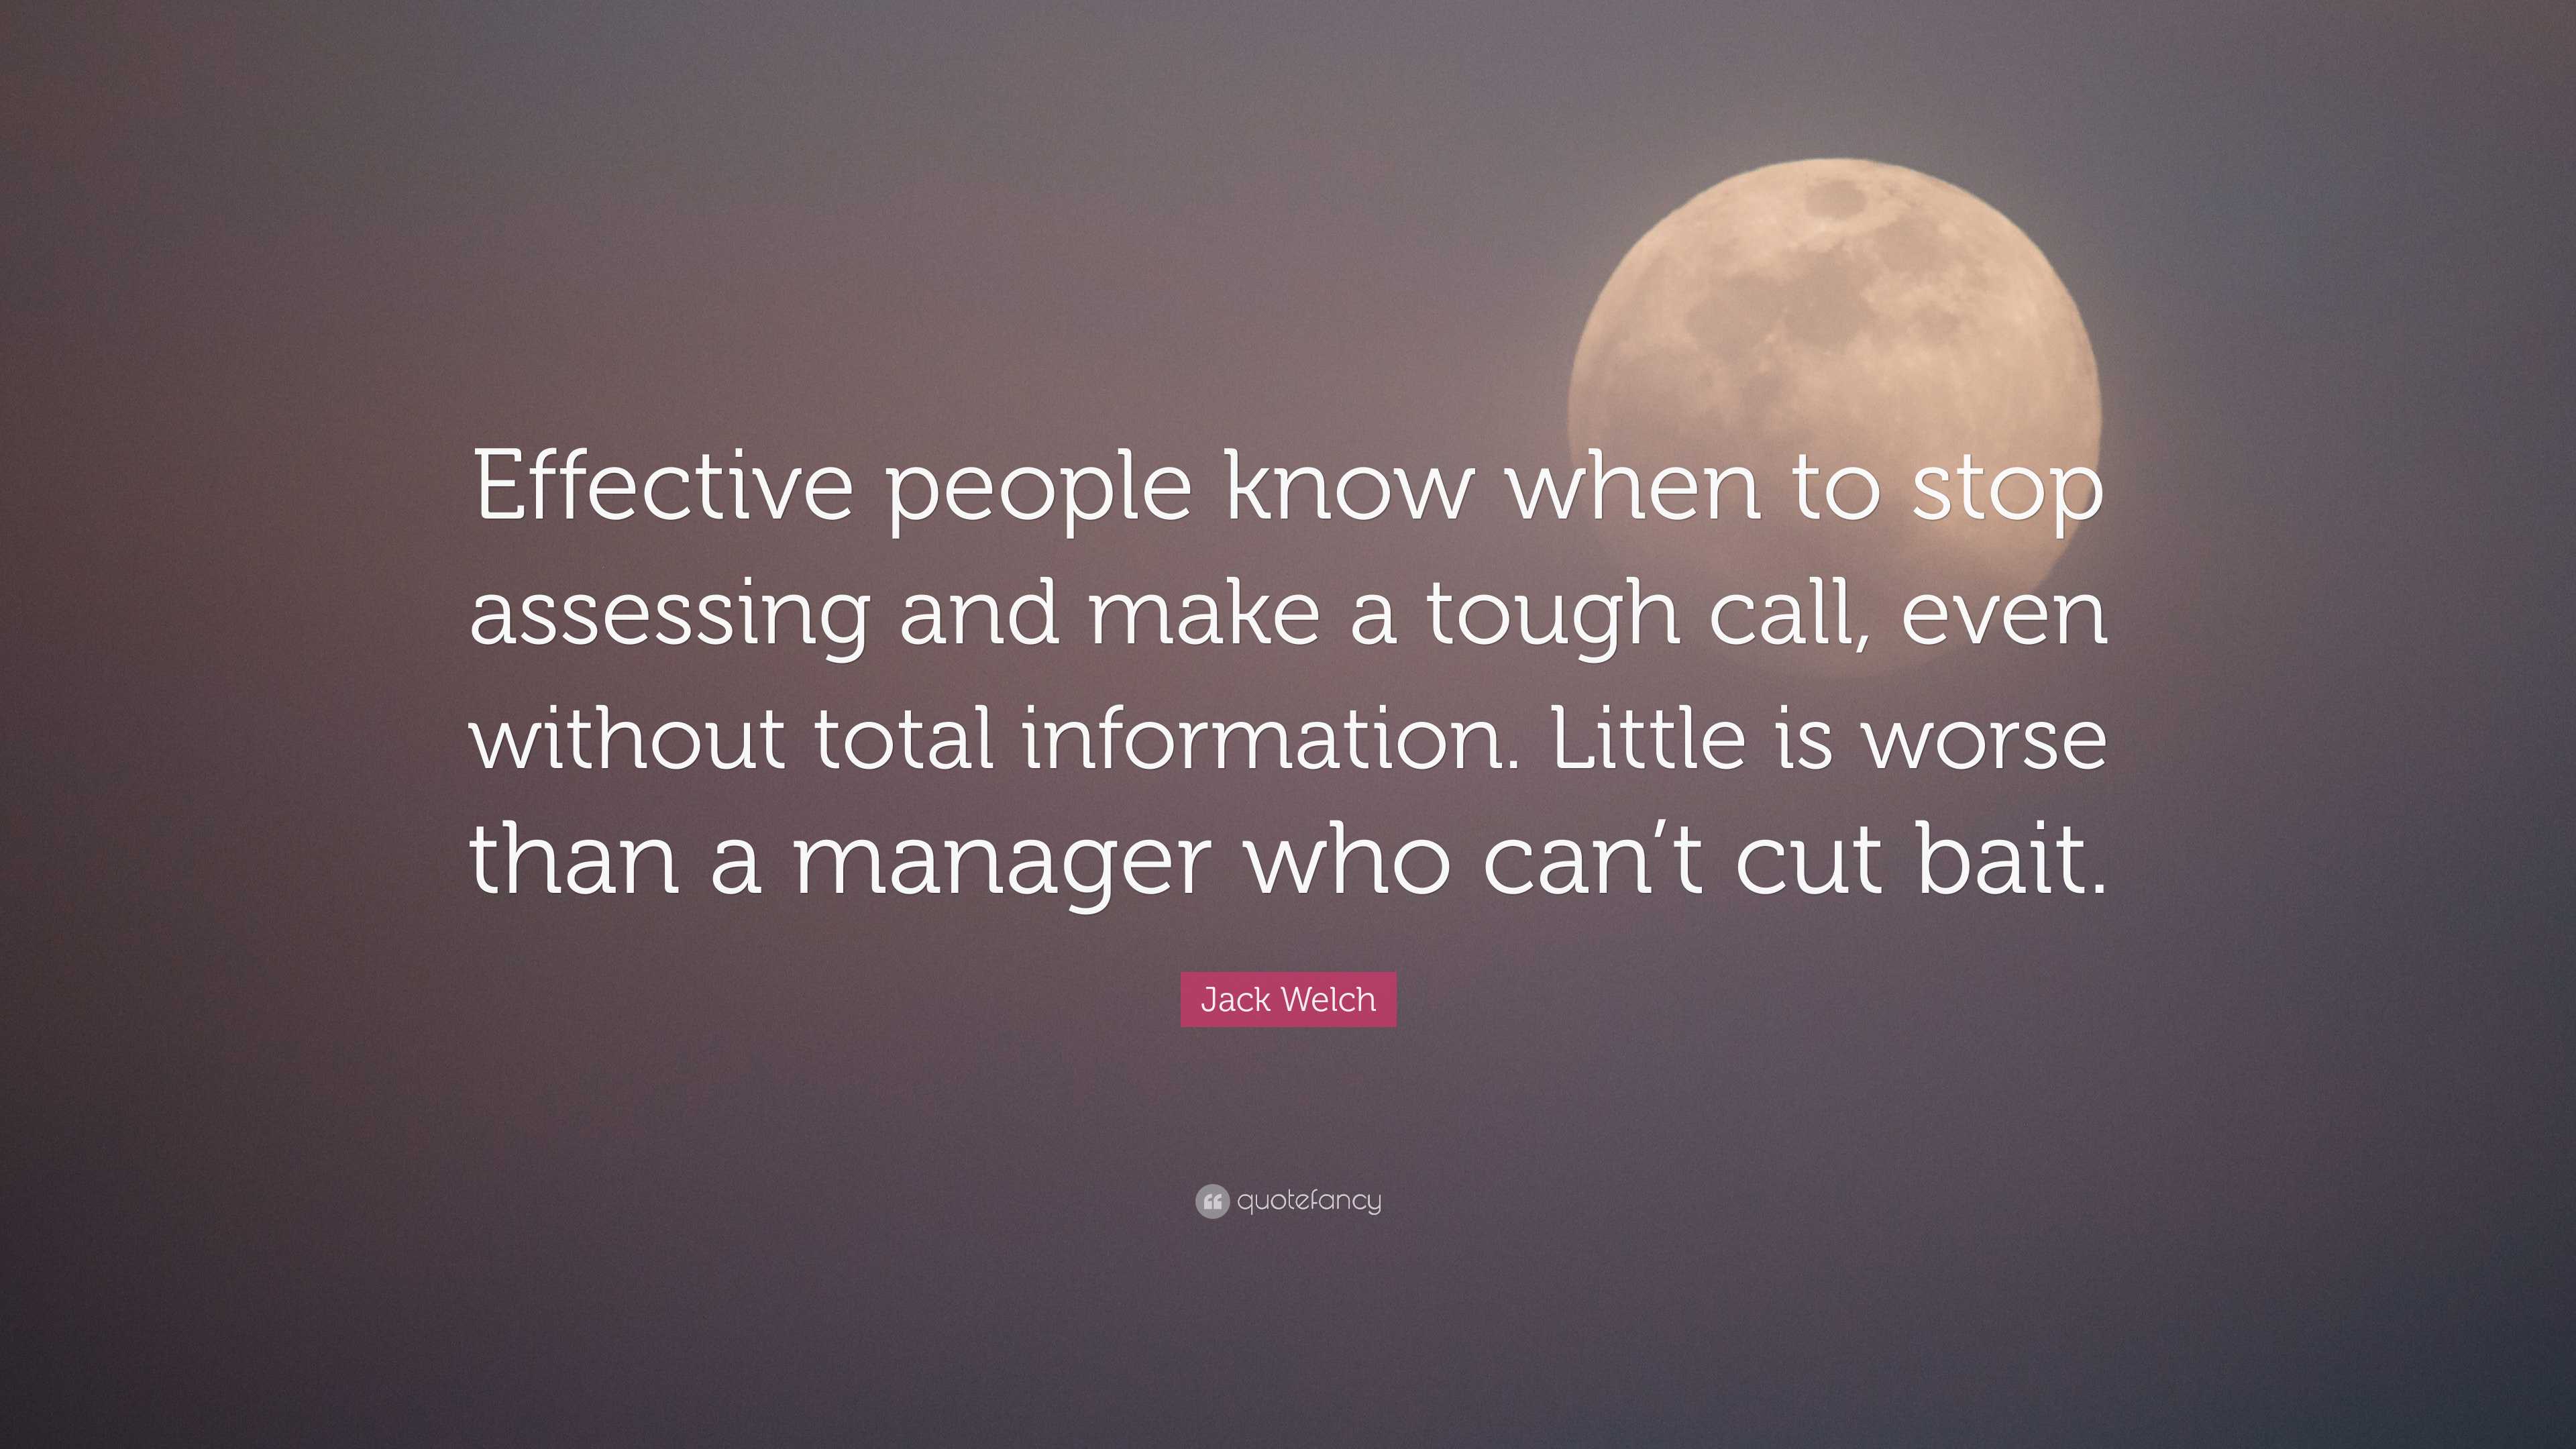 https://quotefancy.com/media/wallpaper/3840x2160/7781647-Jack-Welch-Quote-Effective-people-know-when-to-stop-assessing-and.jpg